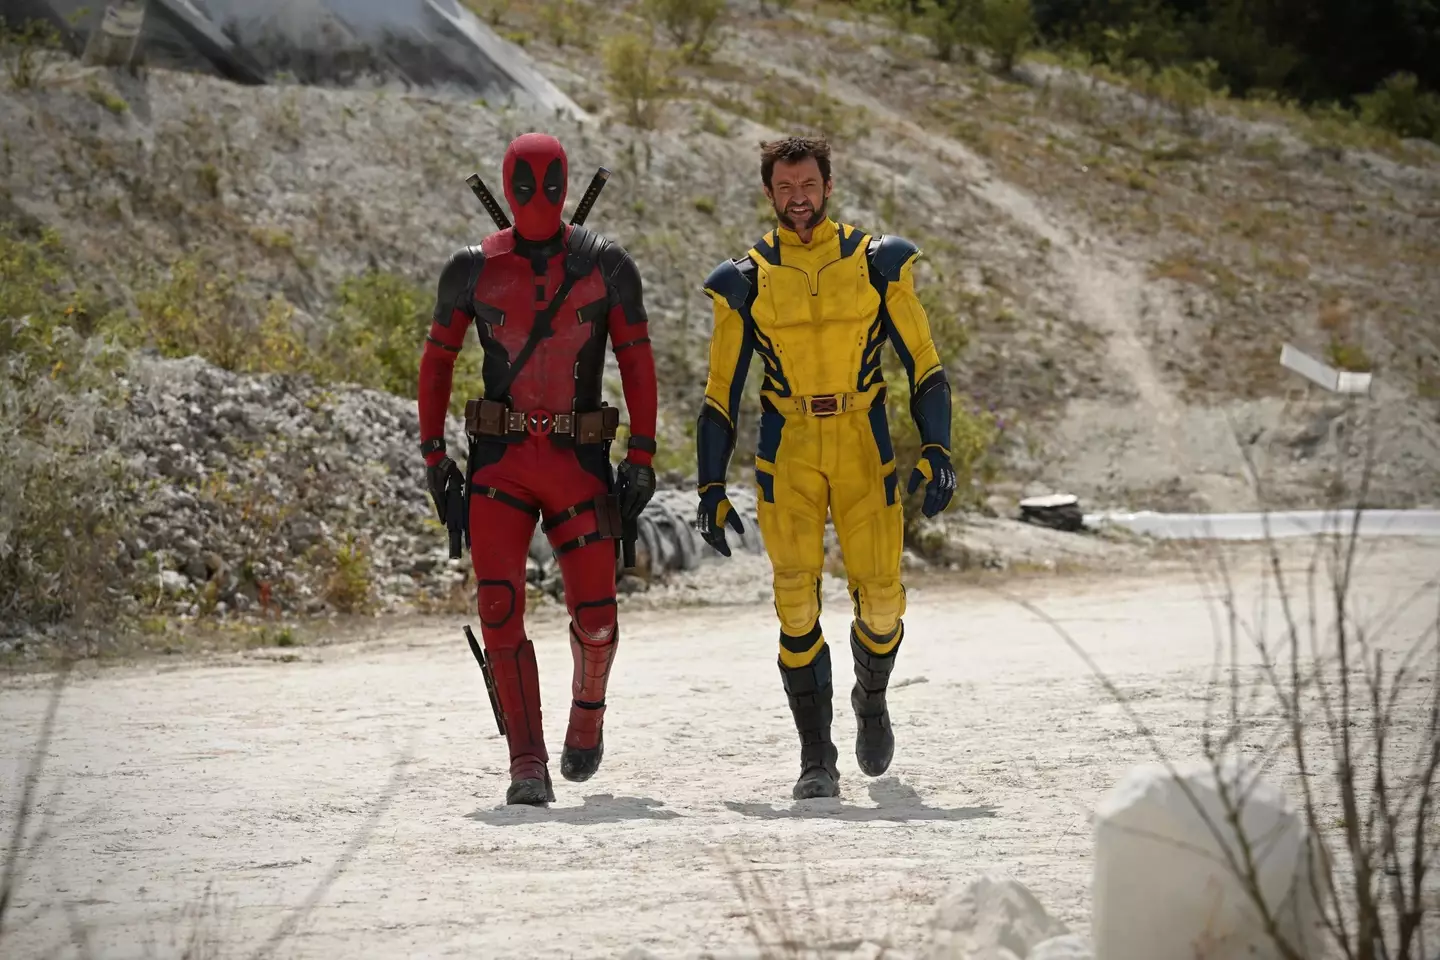 We've finally got our first glimpse at Deadpool and Wolverine.